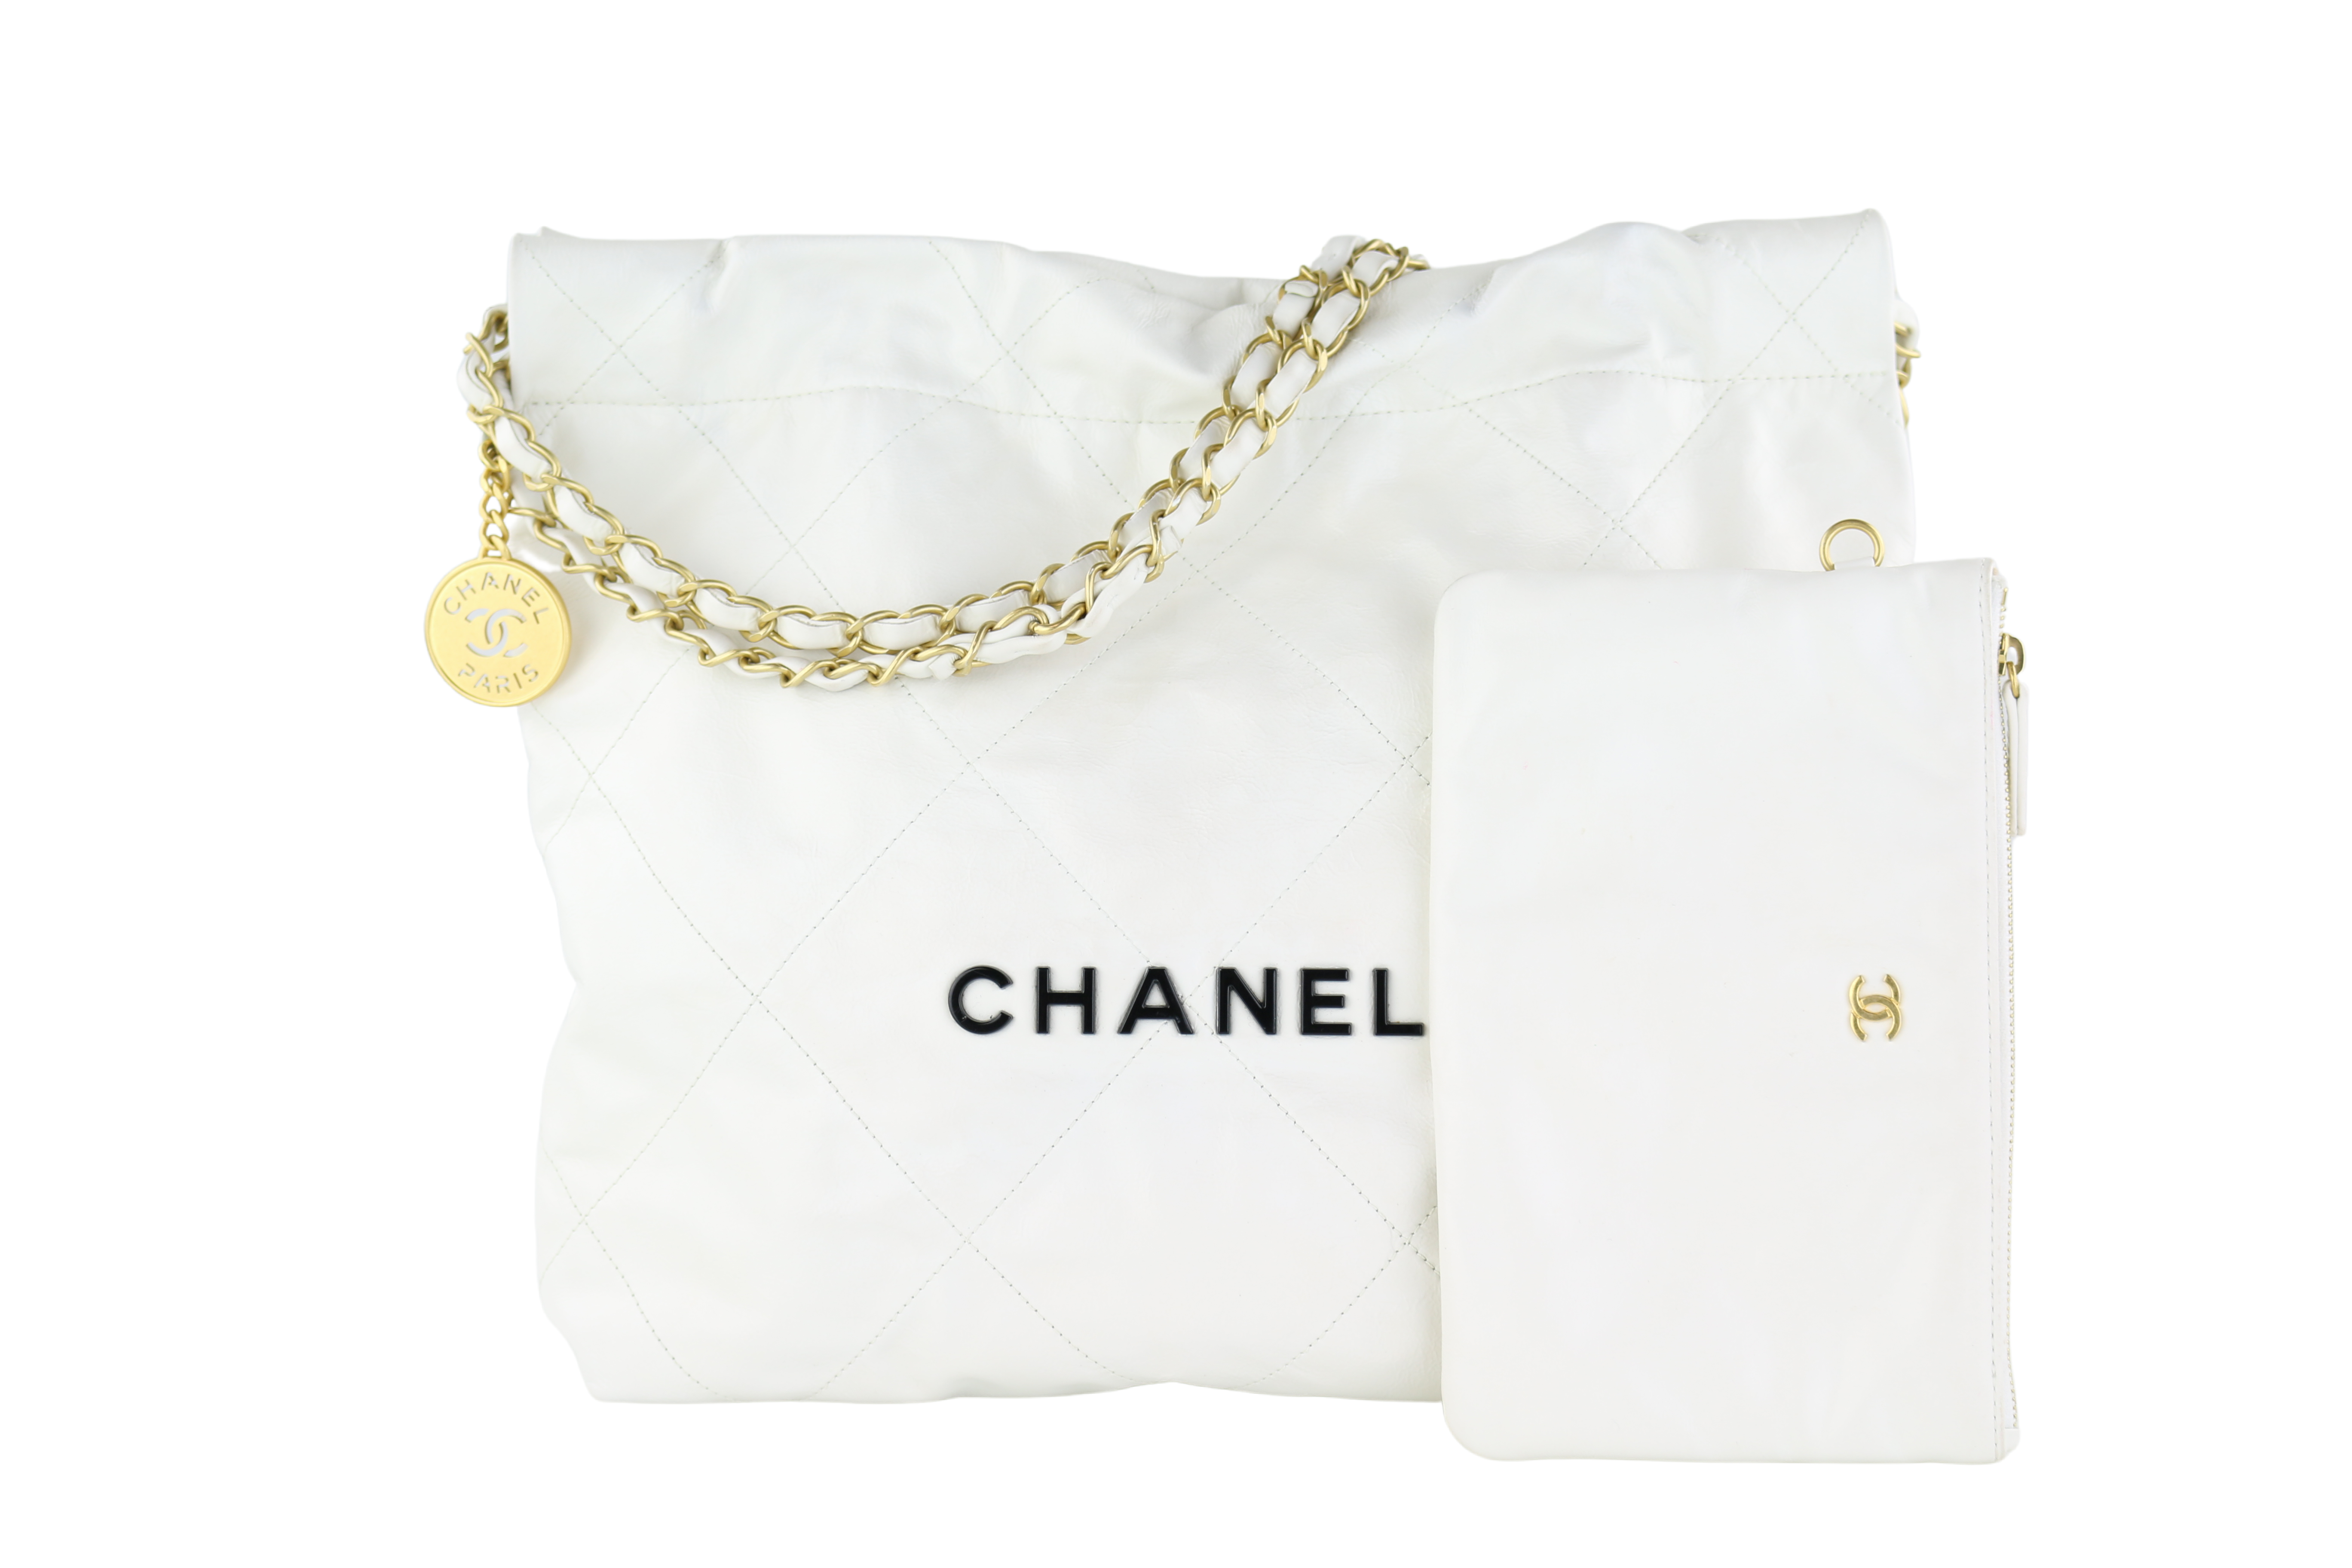 Chanel 22 Handbag Large 22S Calfskin Black/White Logo in Calfskin Leather  with Gold-tone - US